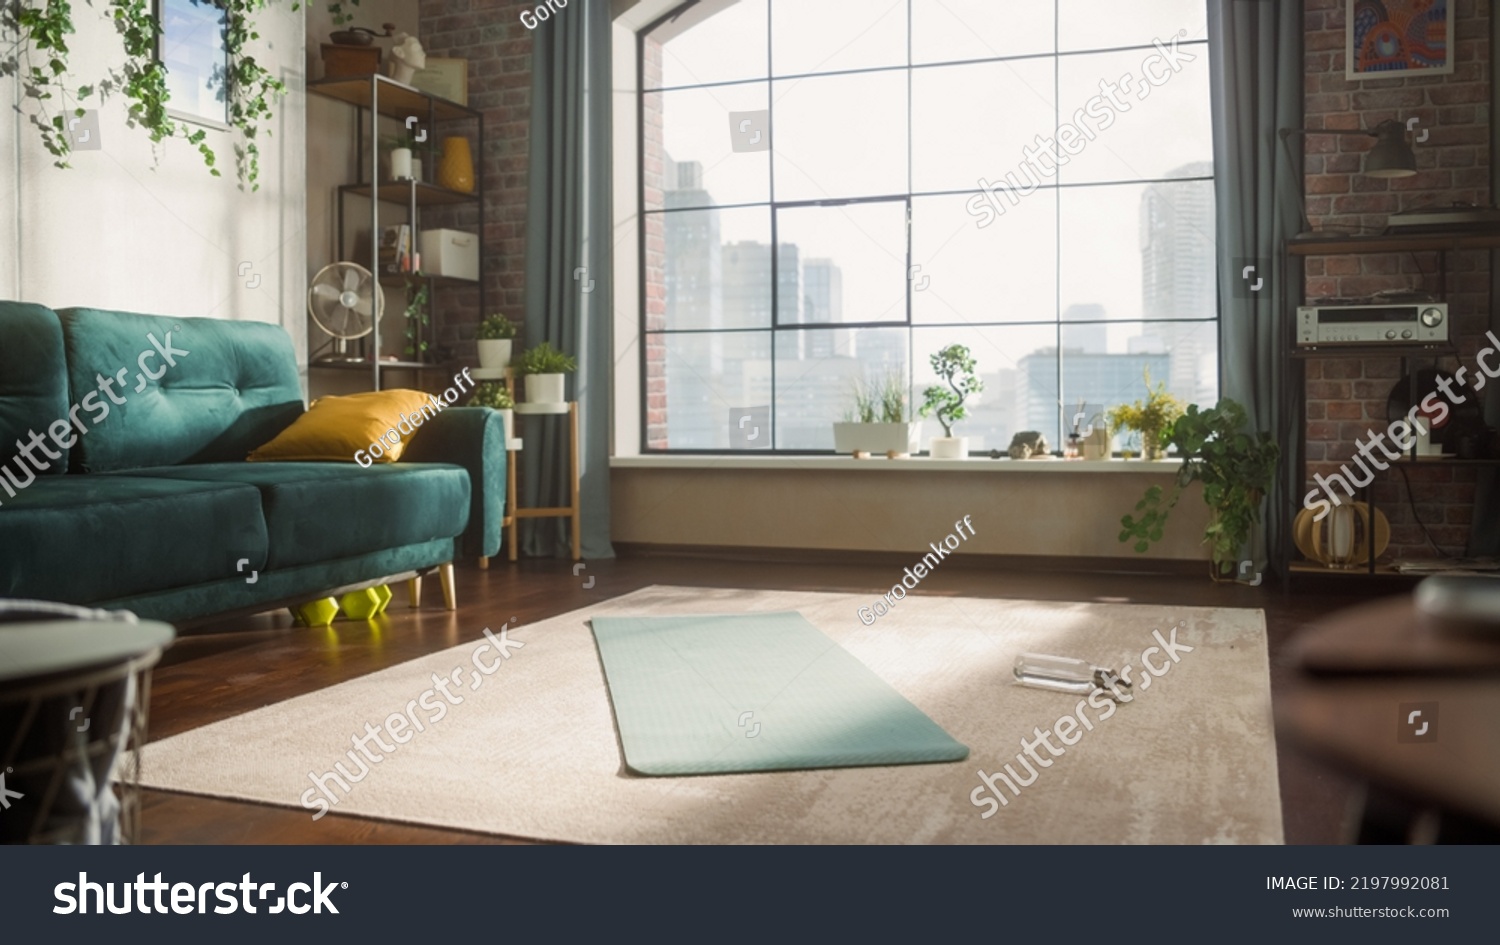 Empty Stylish Loft Apartment With Big Window. Sun Shinning on Spacious and Bright Living Room With Yoga Mat and Bottle of Water Laying on the Floor. Preperation For Online Workout Concept. #2197992081